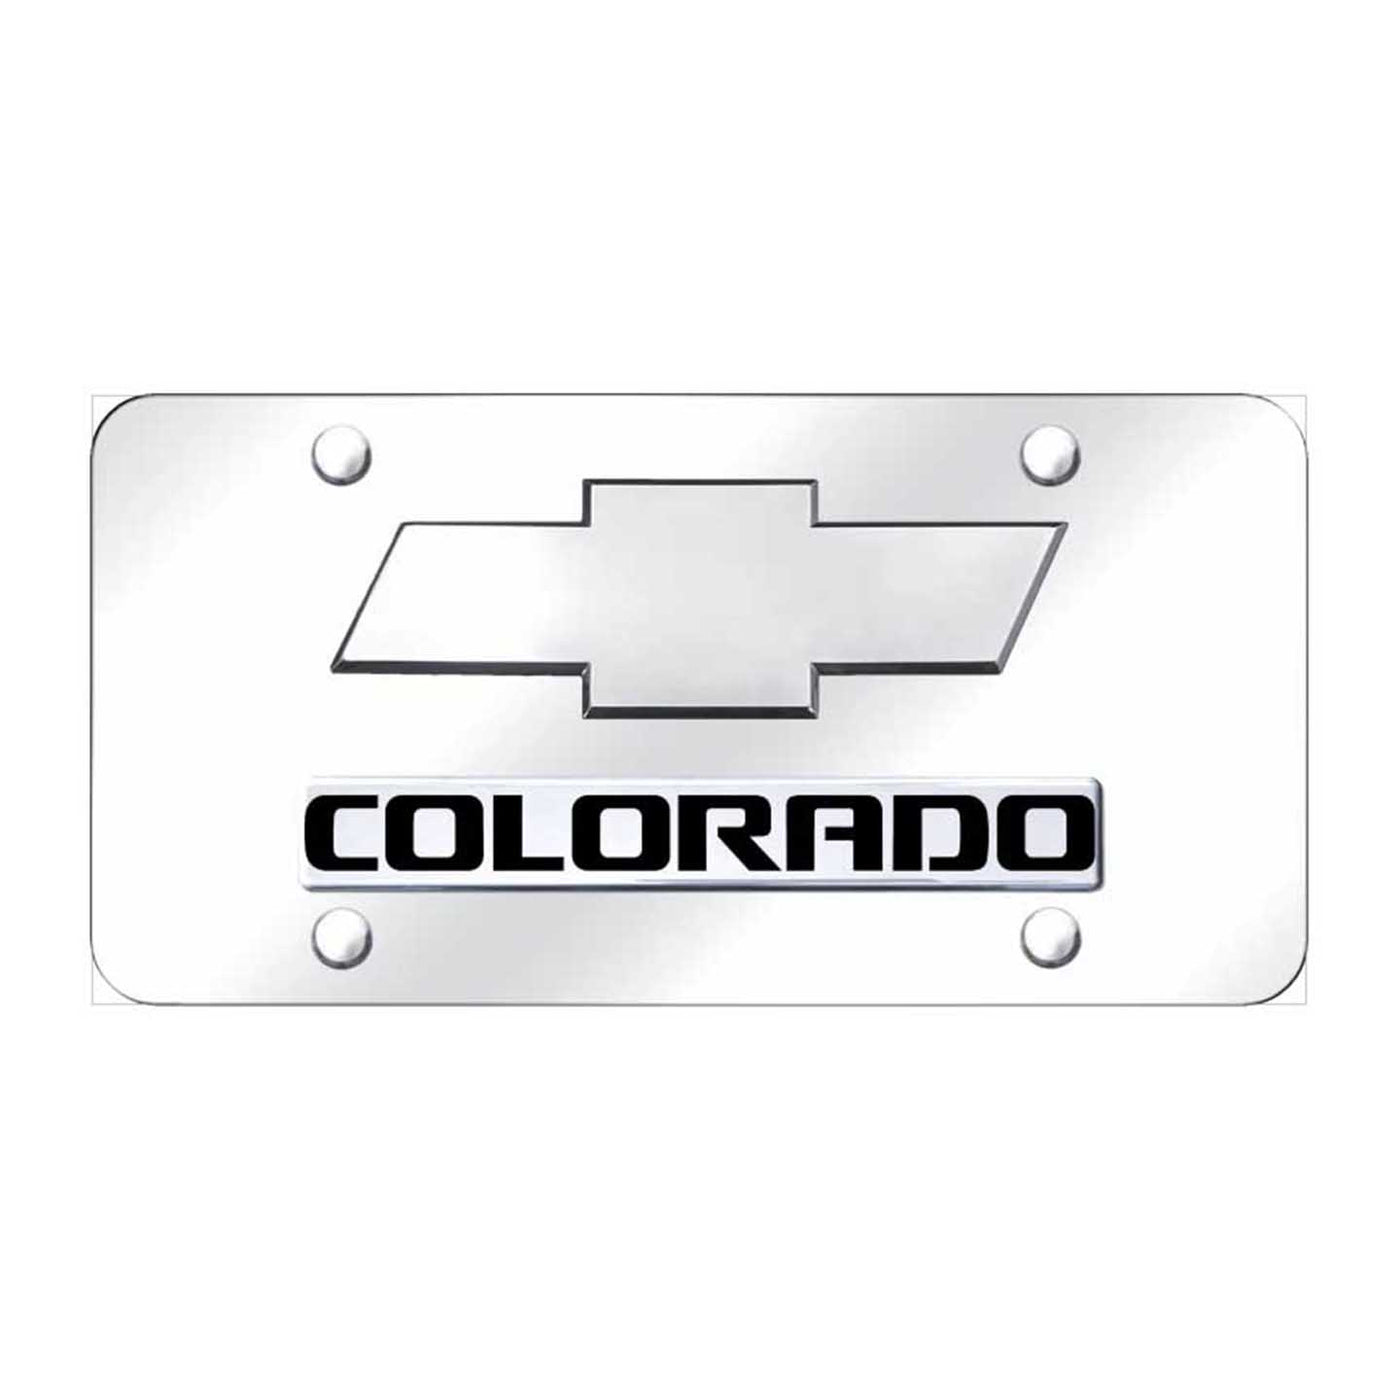 Dual Colorado (New) License Plate - Chrome on Mirrored